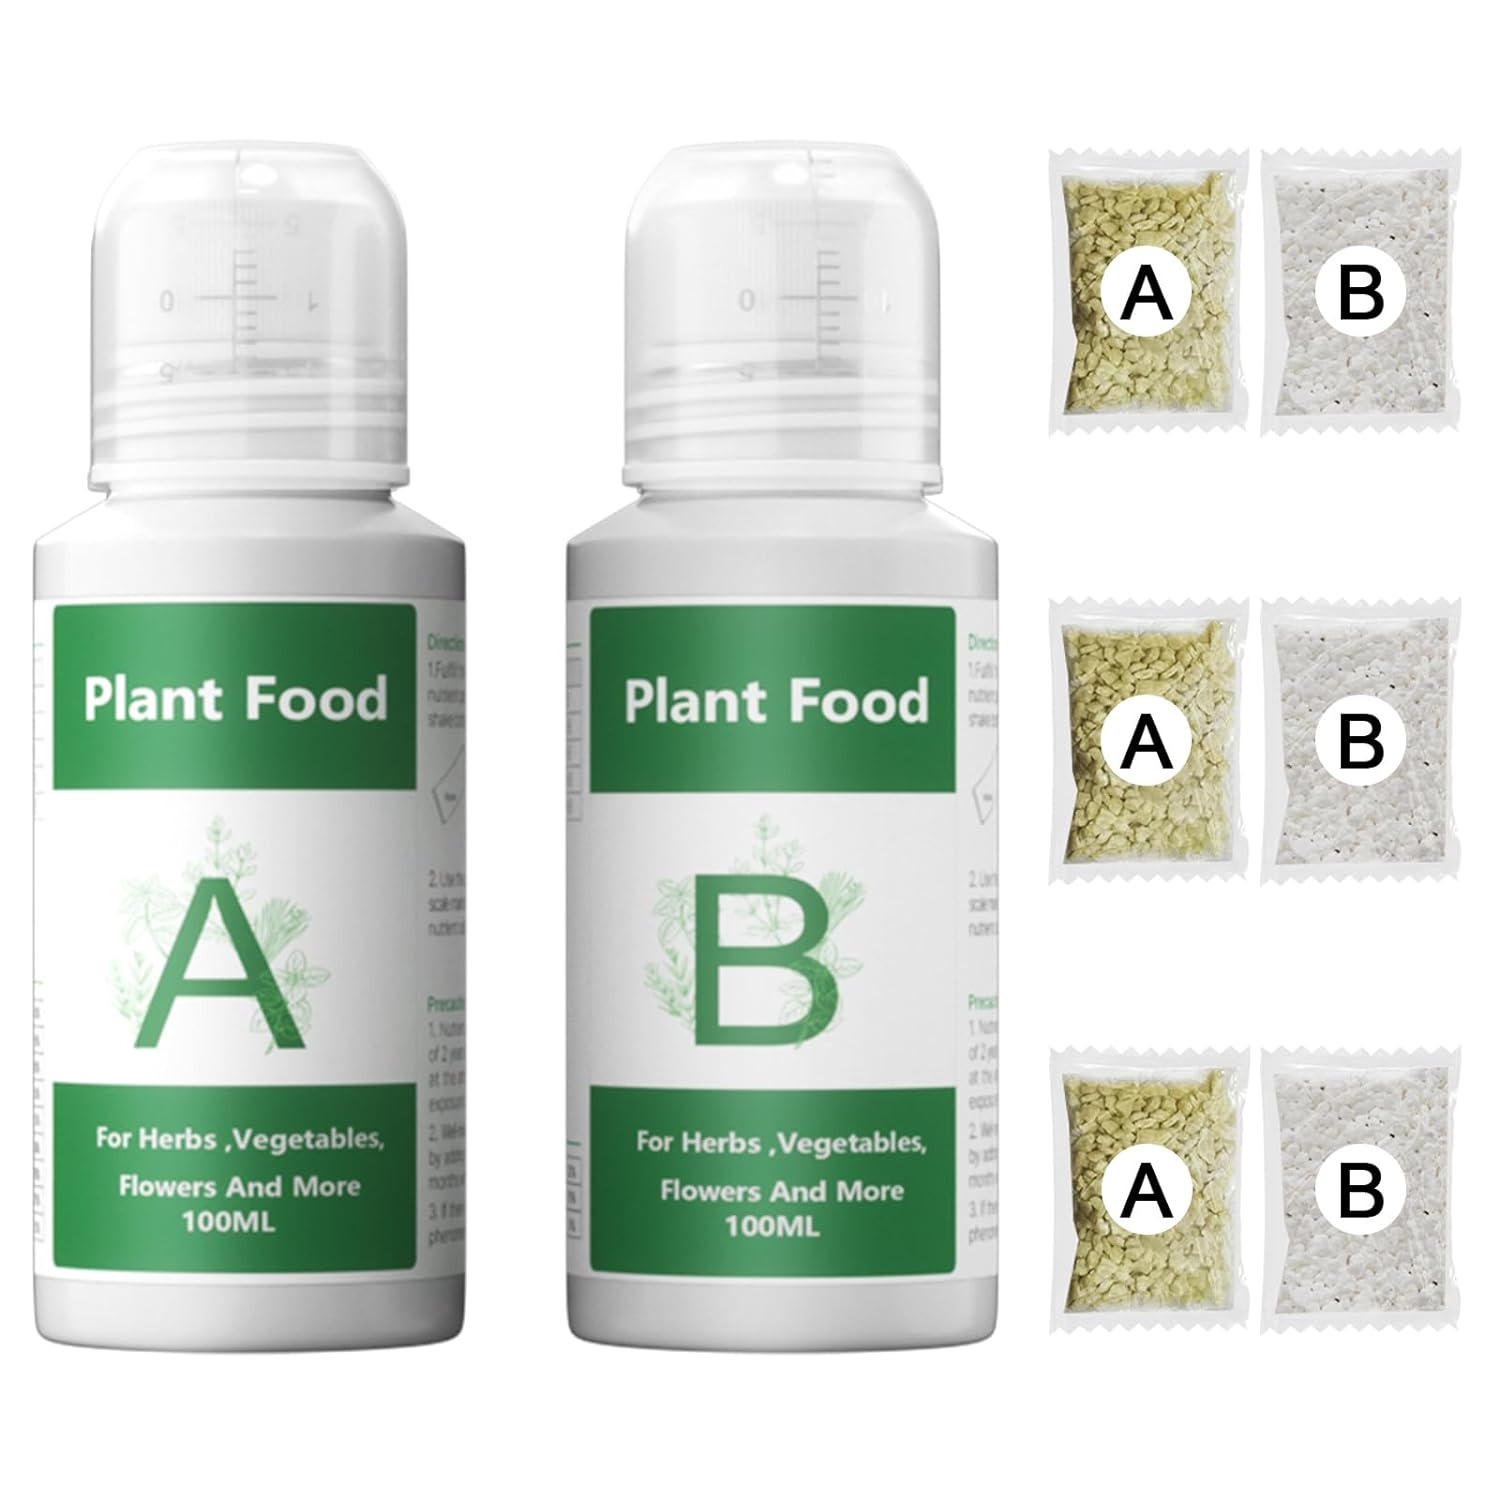 Plant Food A & B - 800ml Total - Fertilizer for Hydroponic Growing Systems